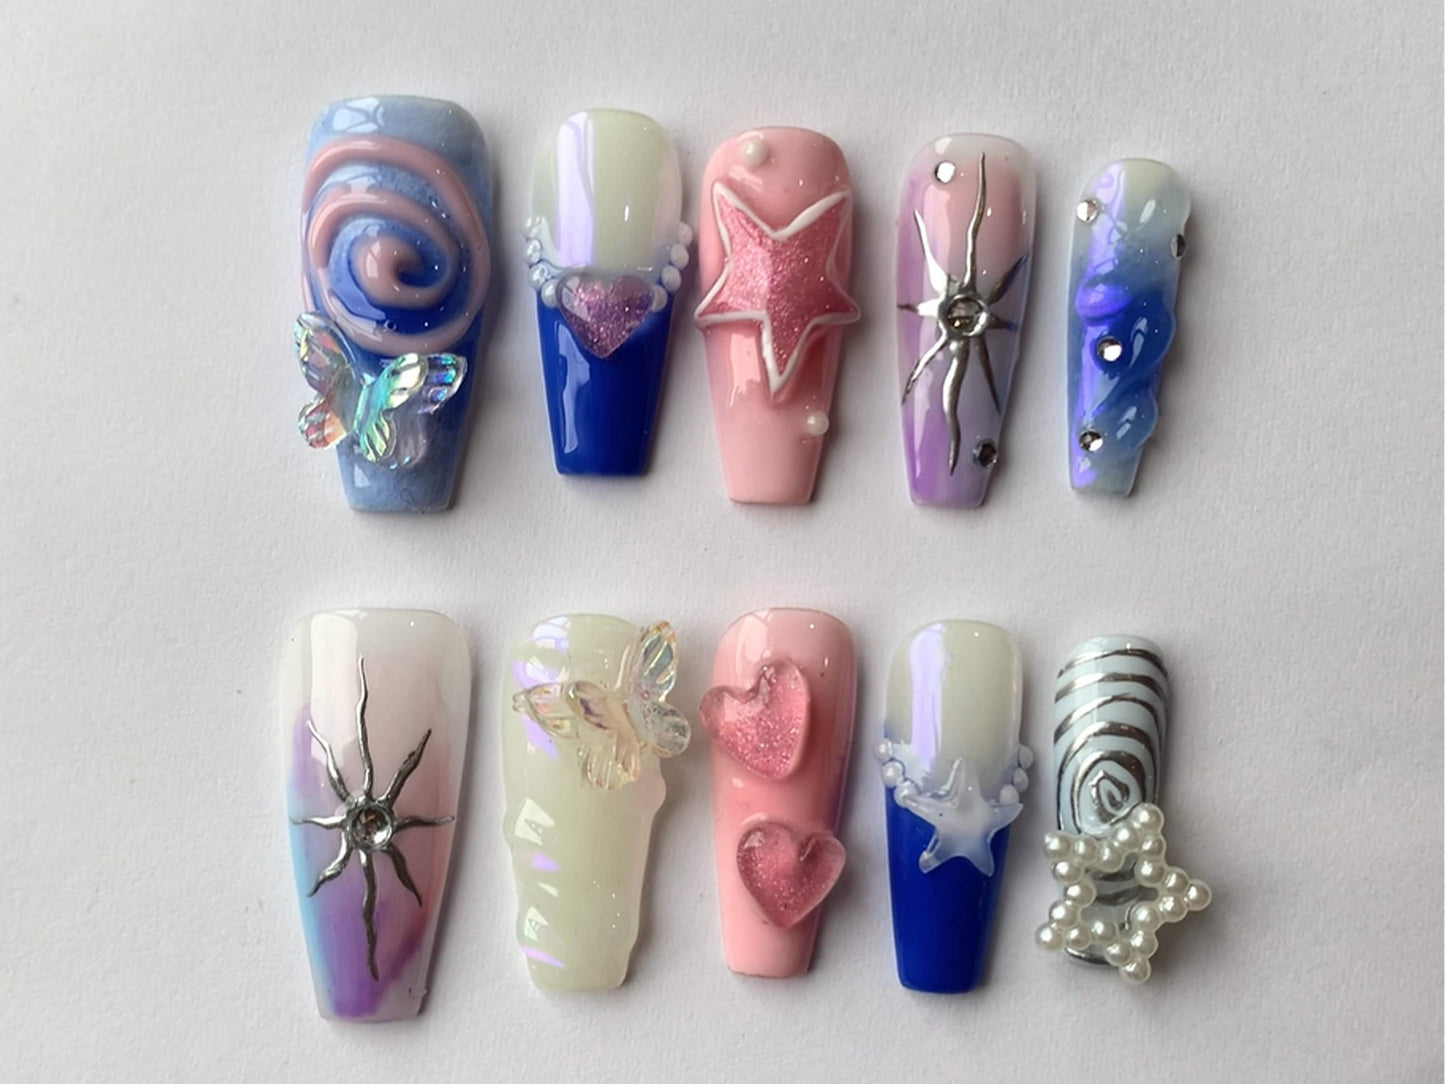 Freestyle 3D Gel Nails: Trendy Press On Nails with Unique Designs | Gel X Nails | Handcrafted Press On Nails| Coffin Nails | J137